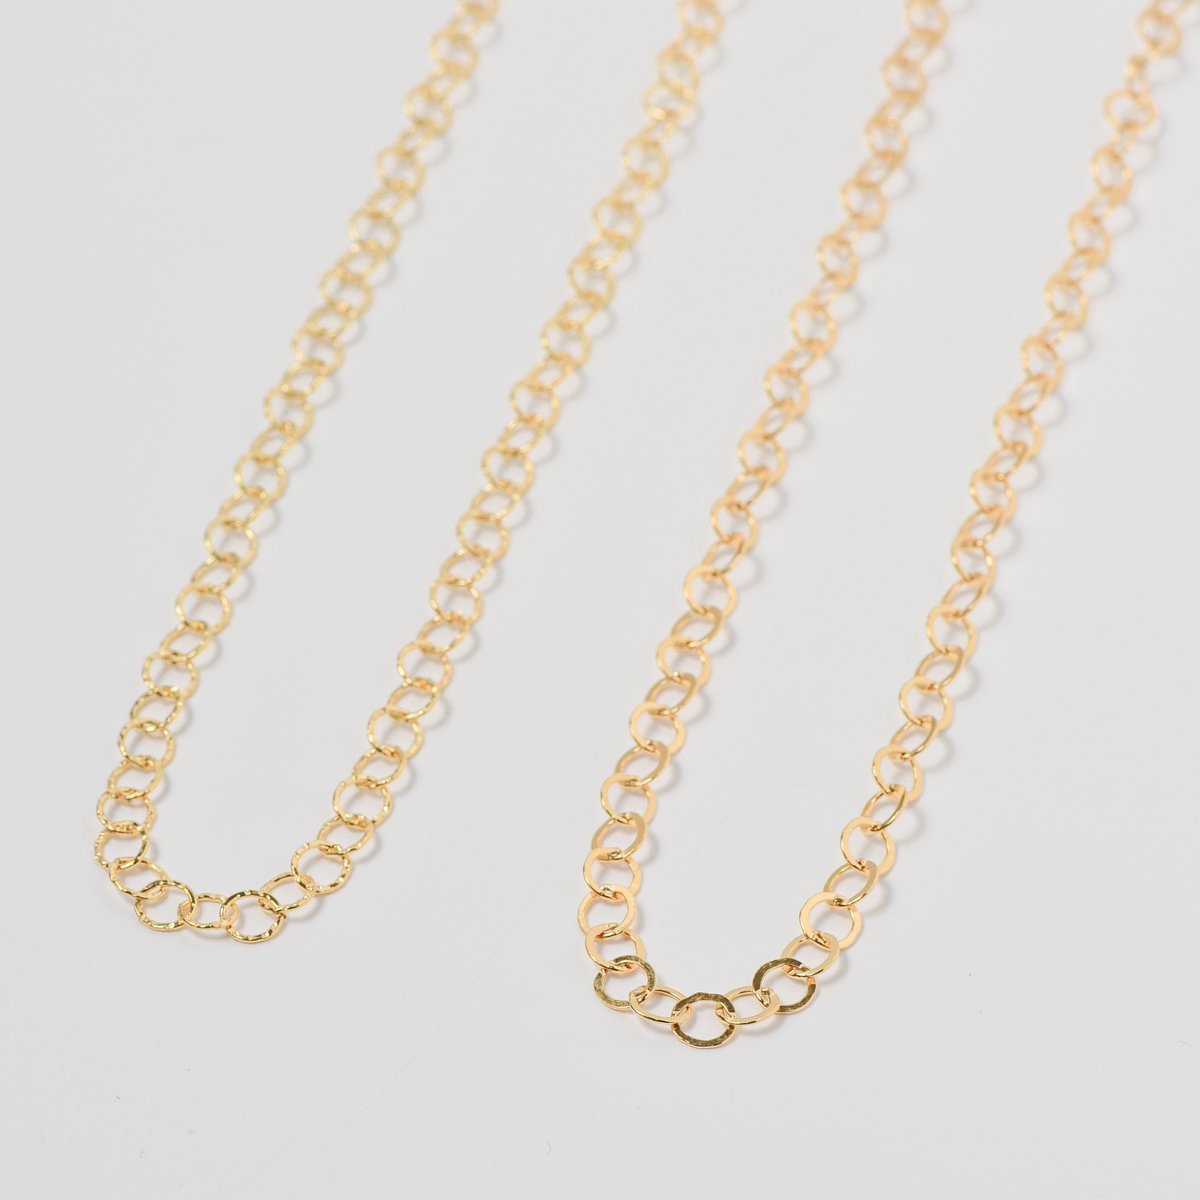 3mm Goldfill 16-30 Inch Chain